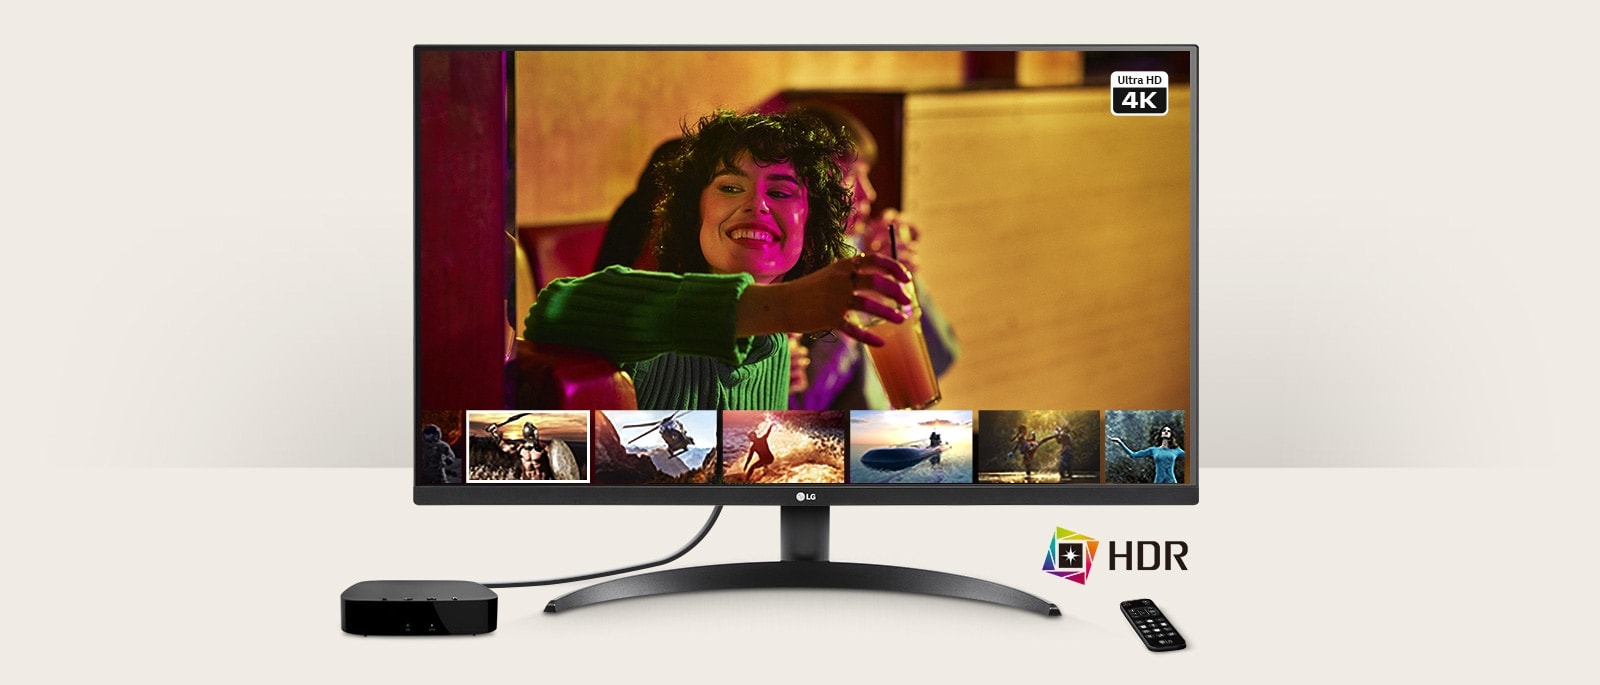 The monitor enabling users to enjoy 4K and HDR Contents.